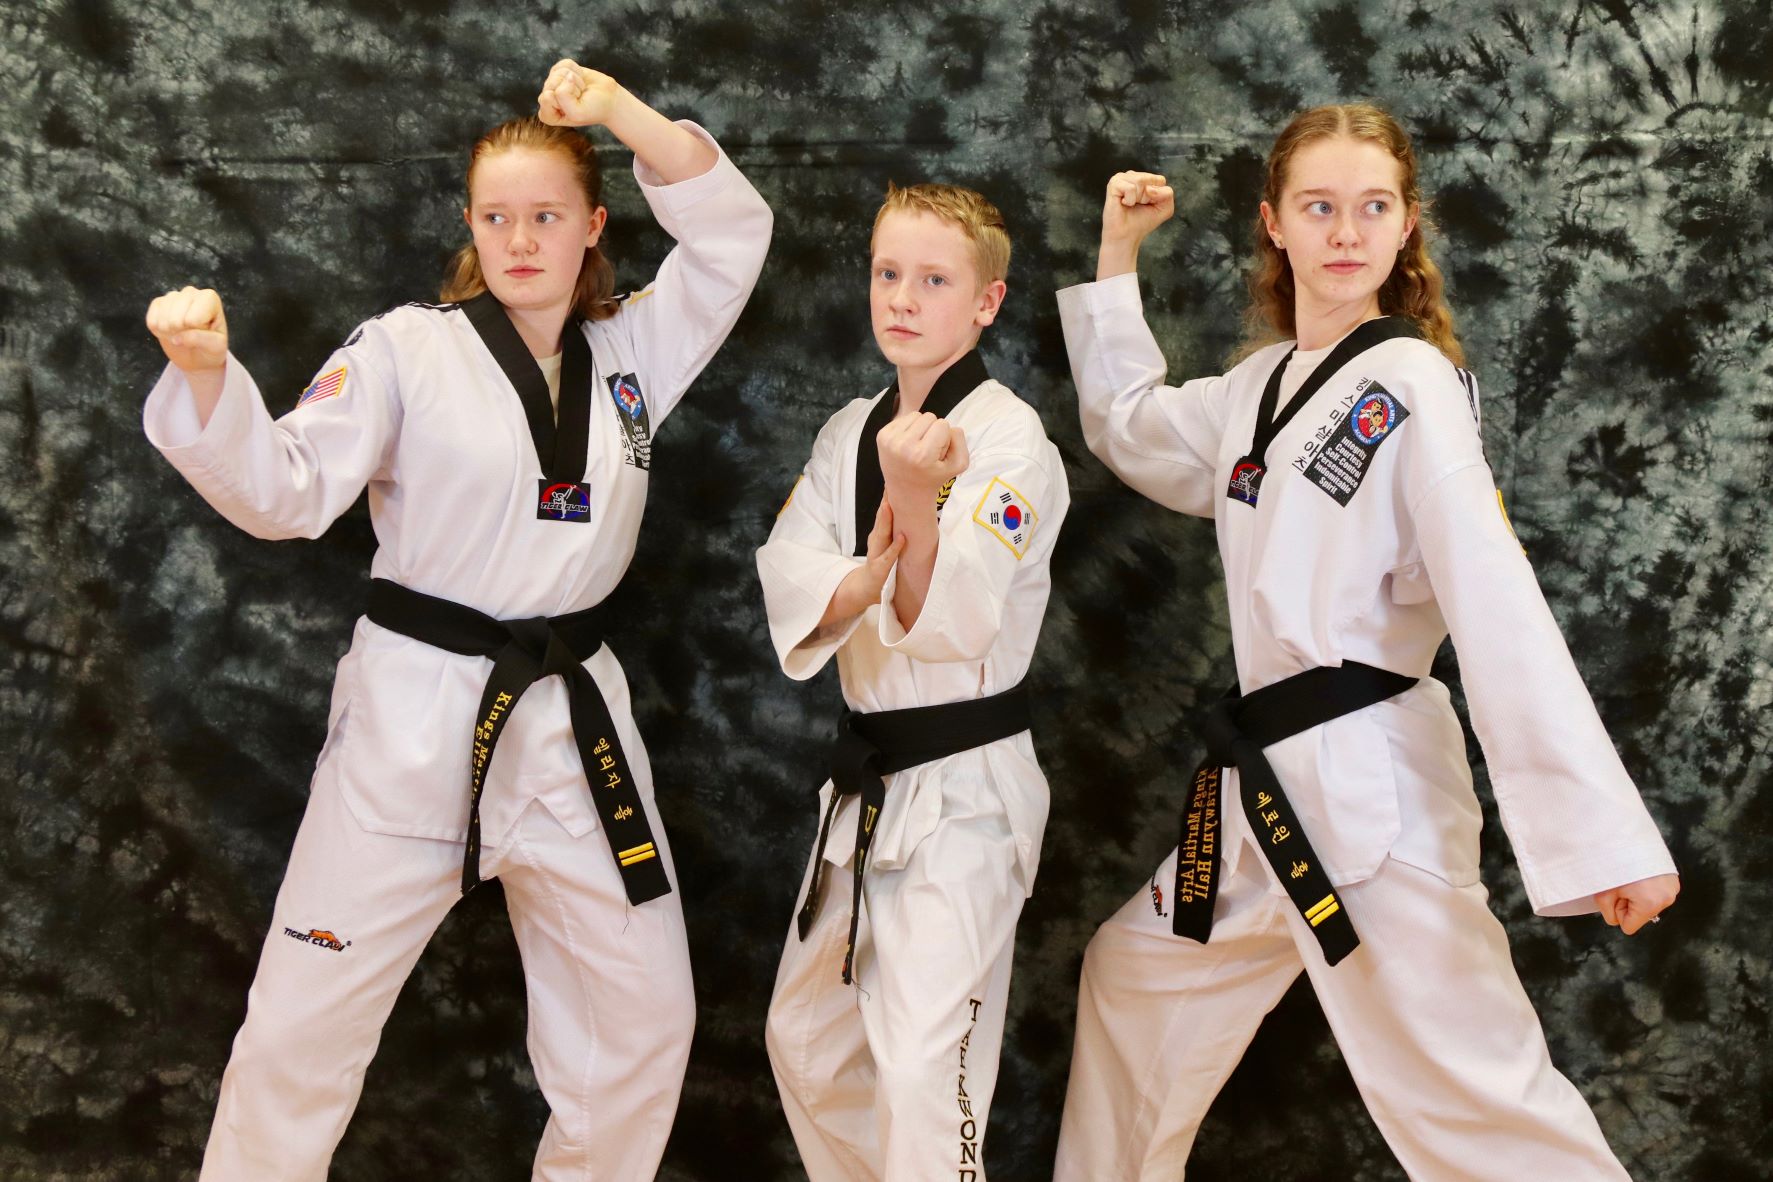 King's Martial Arts Academy About Us